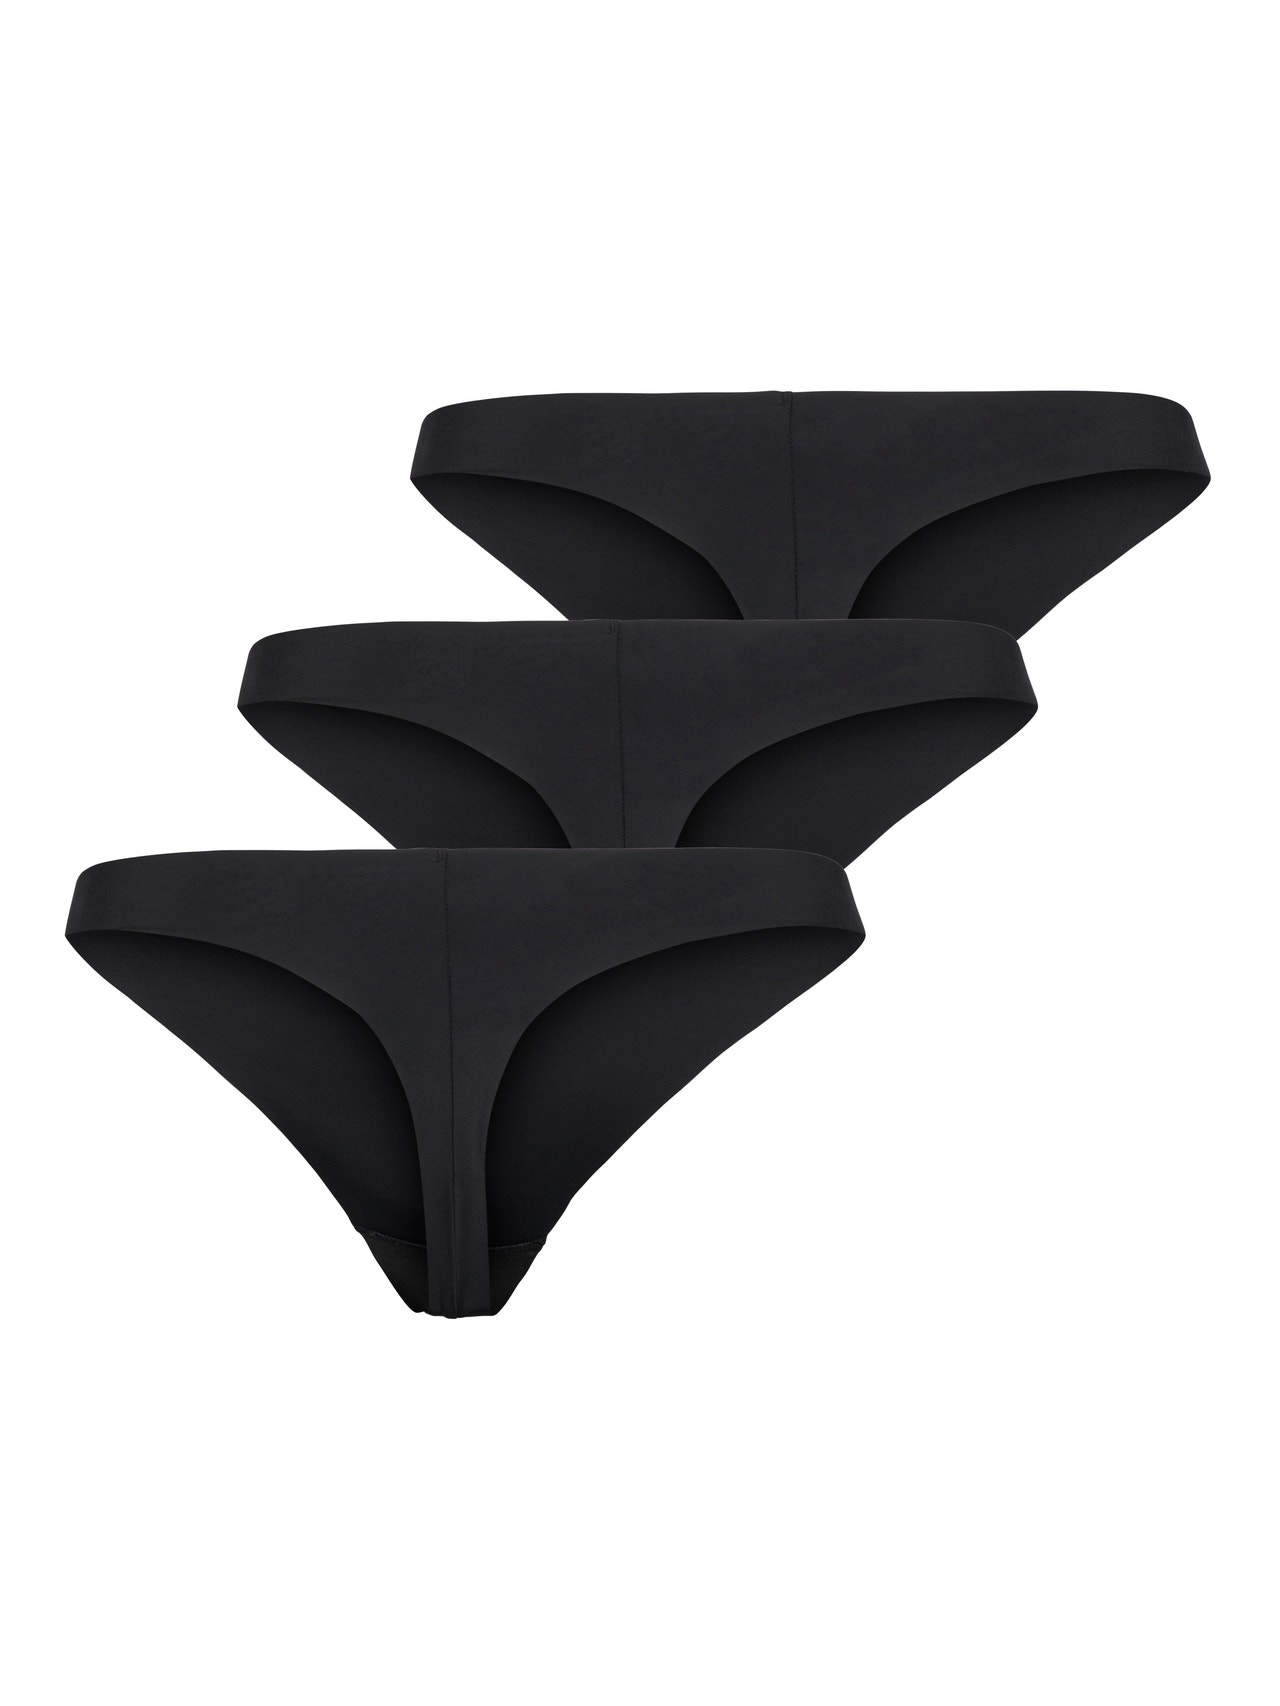 ONLY 3-pack thongs -Black - 15295983